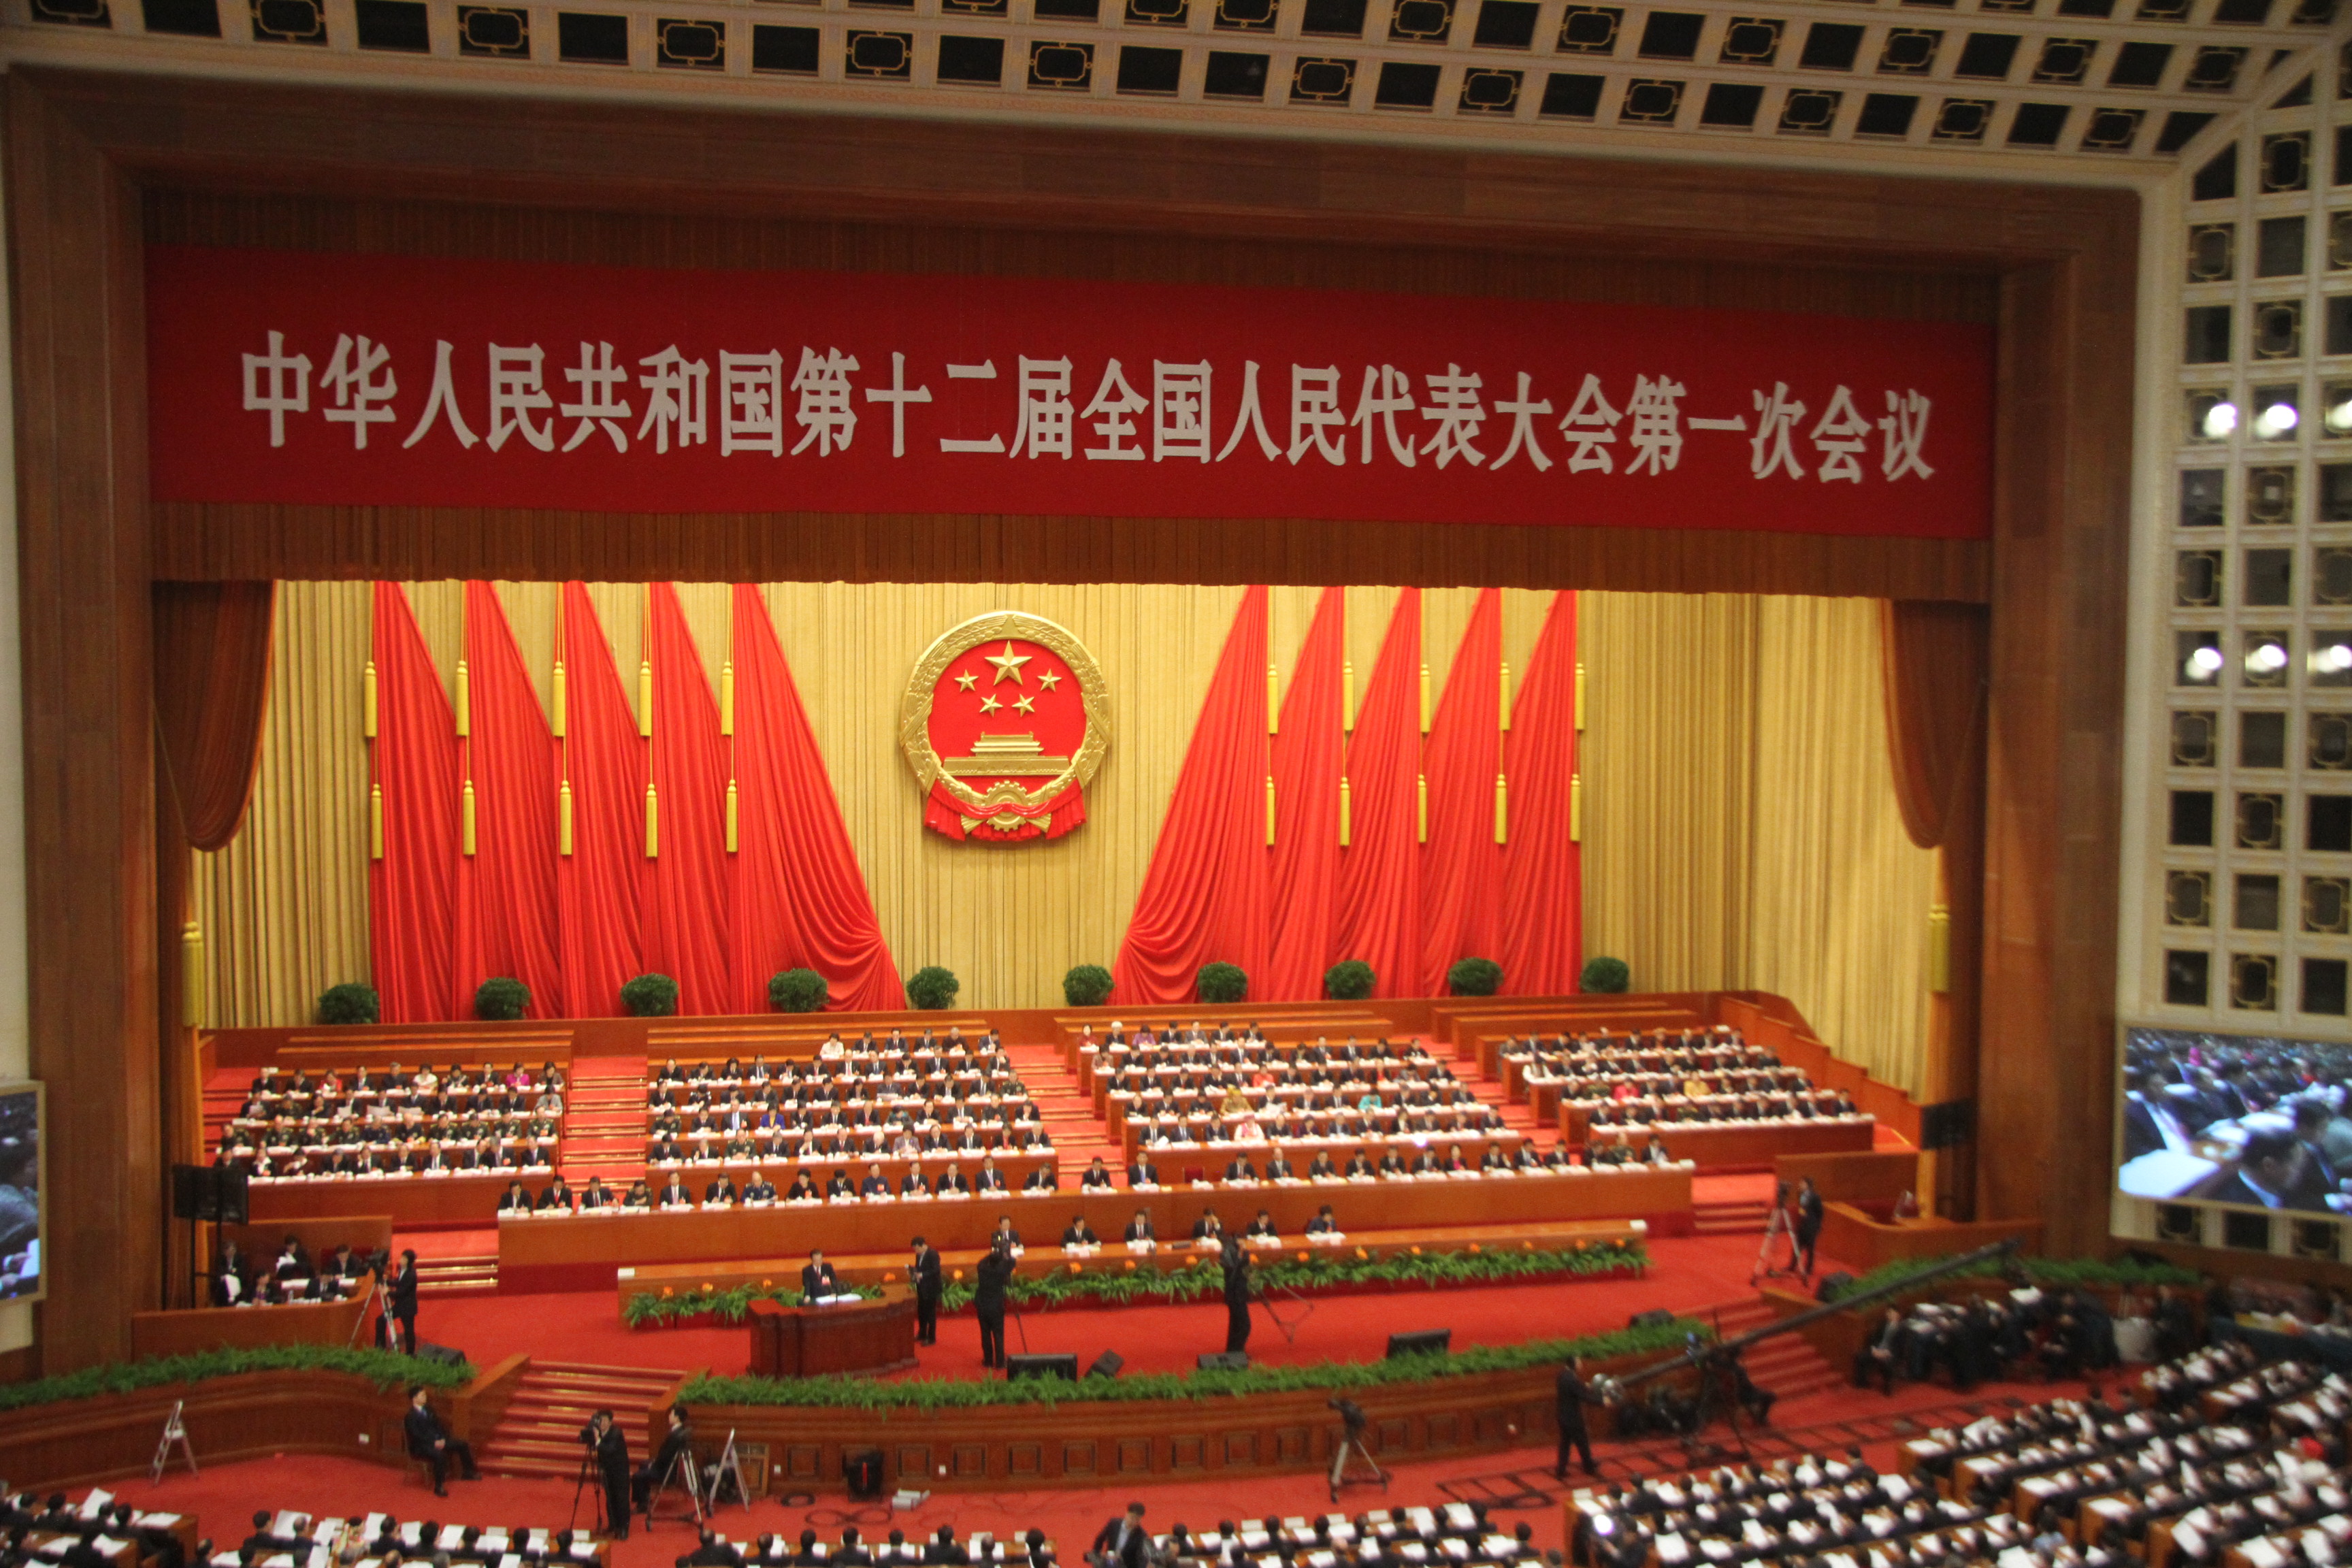 Meeting of the National People's Congress in 2013.